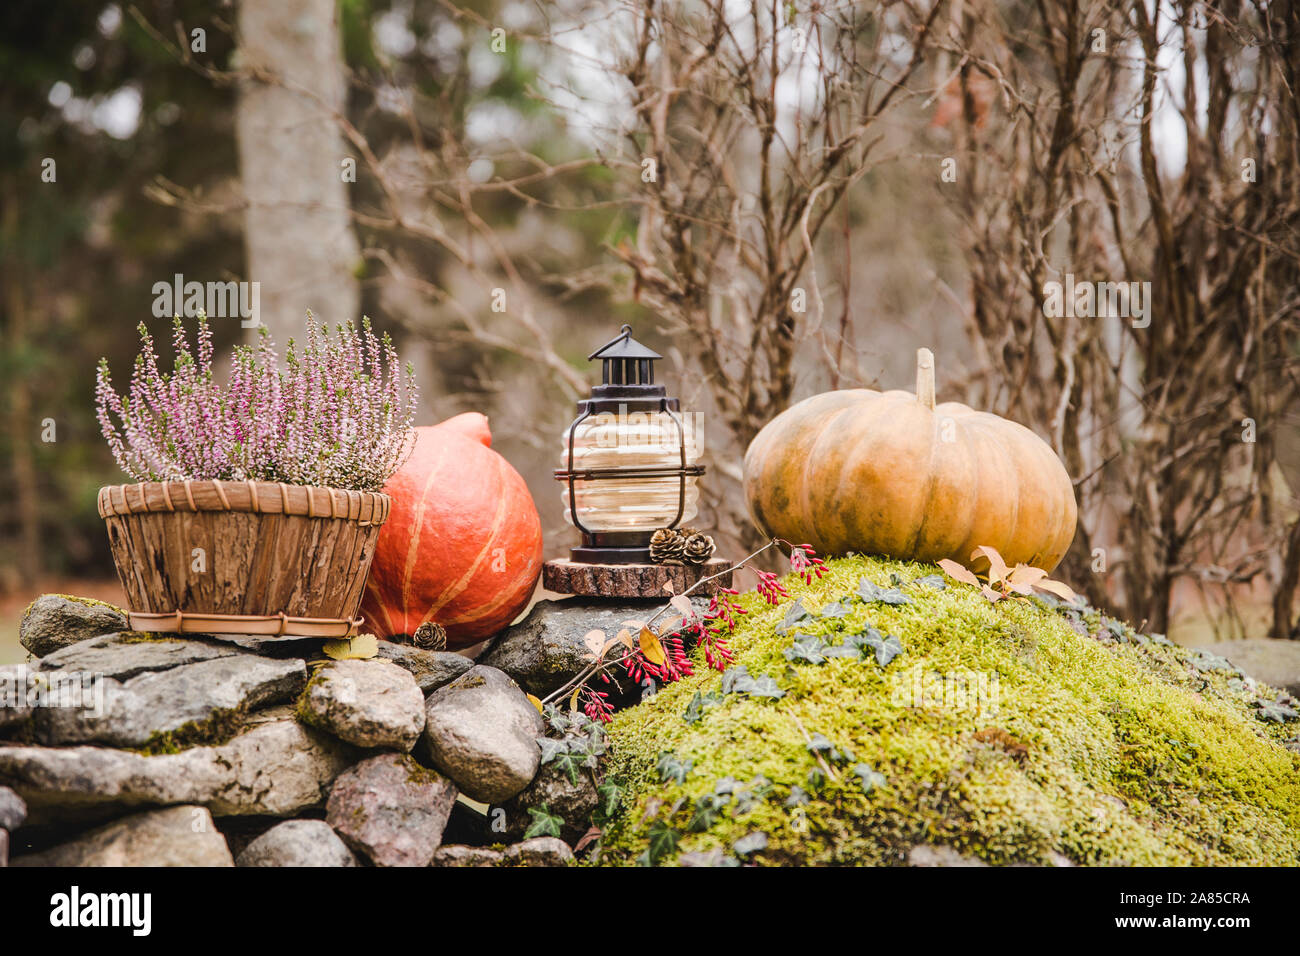 Seasonal home garden autumn decoration with heather flower in pine bark flower pot, pumpkins and lantern with candle illuminated. Stock Photo